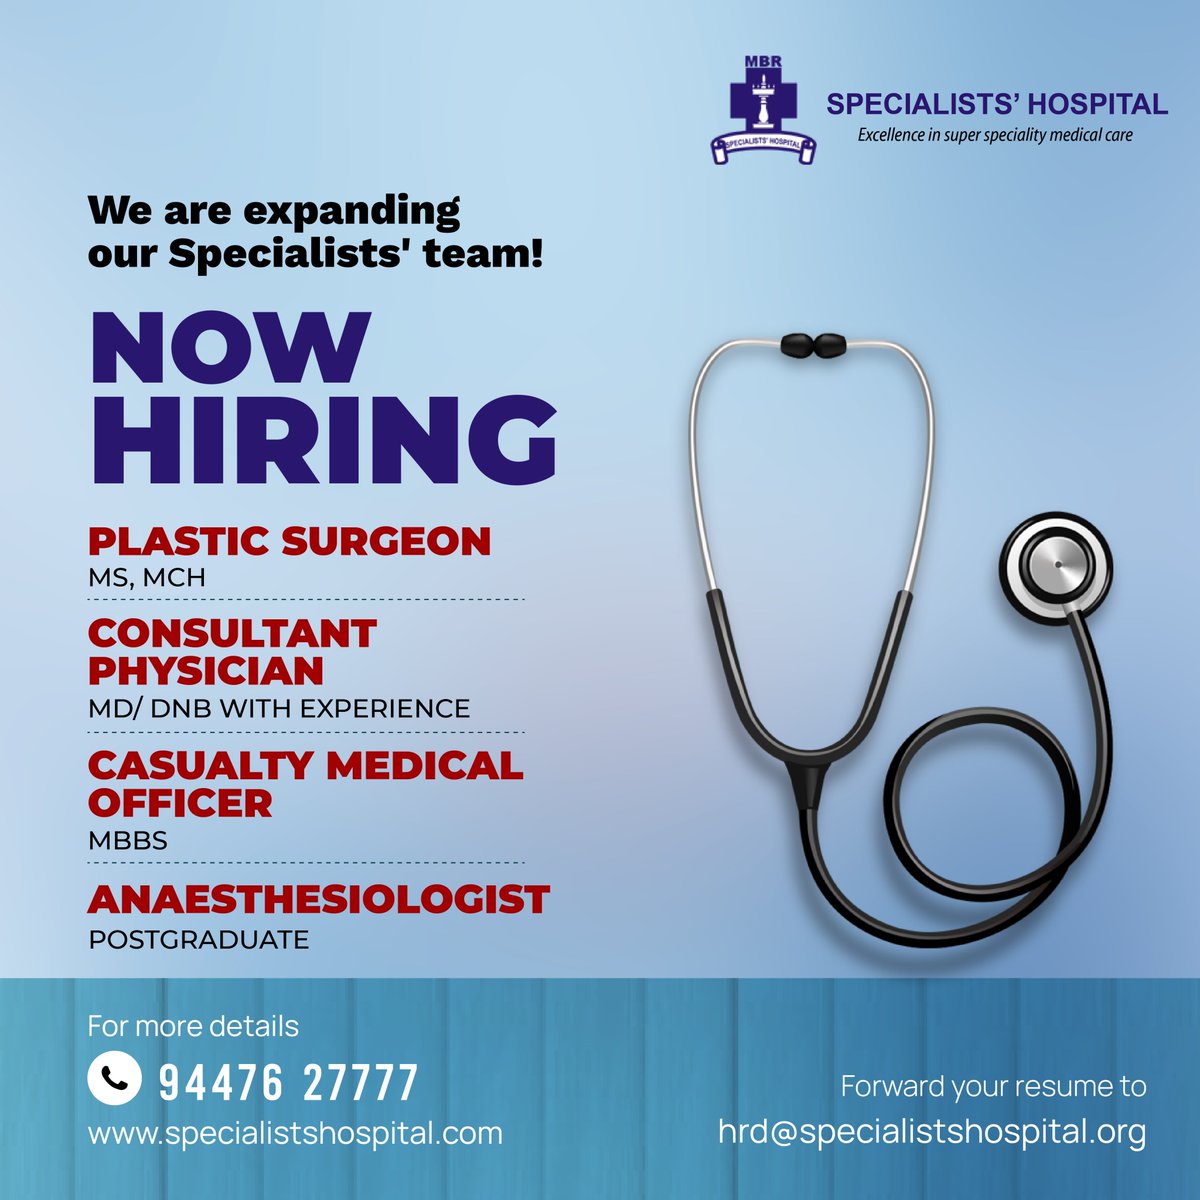 Interested candidates who want to be part of our stellar team, may send your resume to: hrd@specialistshospital.org

For more info, please Call: 94476 27777

#latesttreatment #besthospital #bestdoctors #vacancy #nowhiring #recruiting #bestteam #plasticsurgeon #physician #casualty